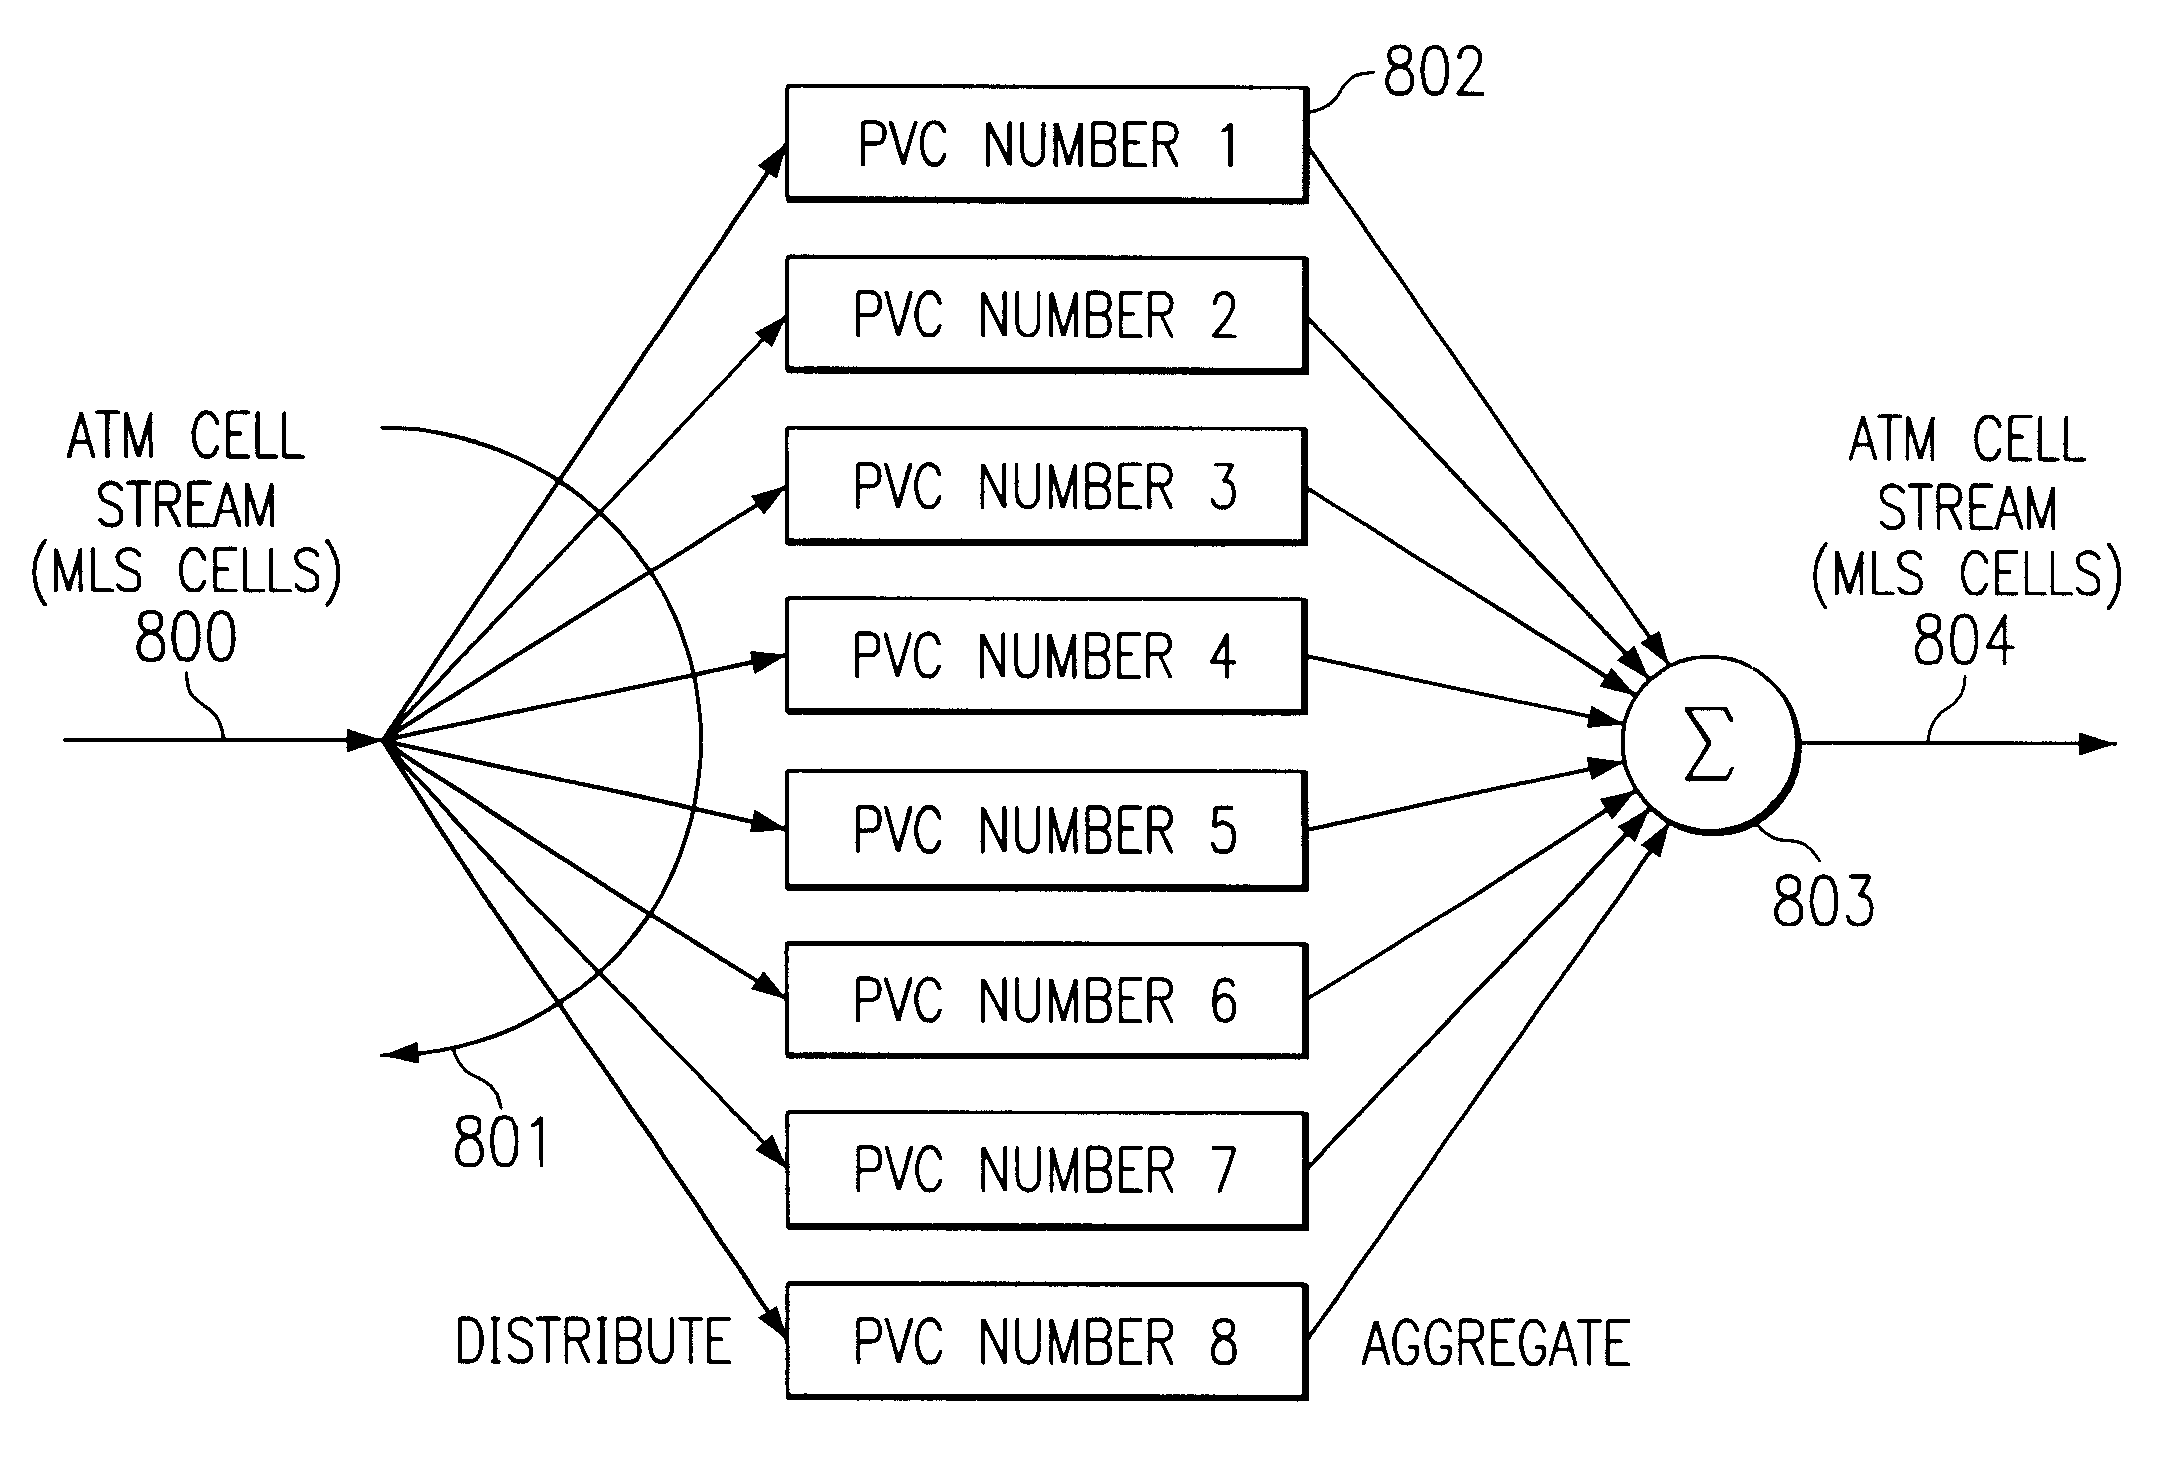 Multi-link segmentation and reassembly for bonding multiple PVC's in an inverse multiplexing arrangement